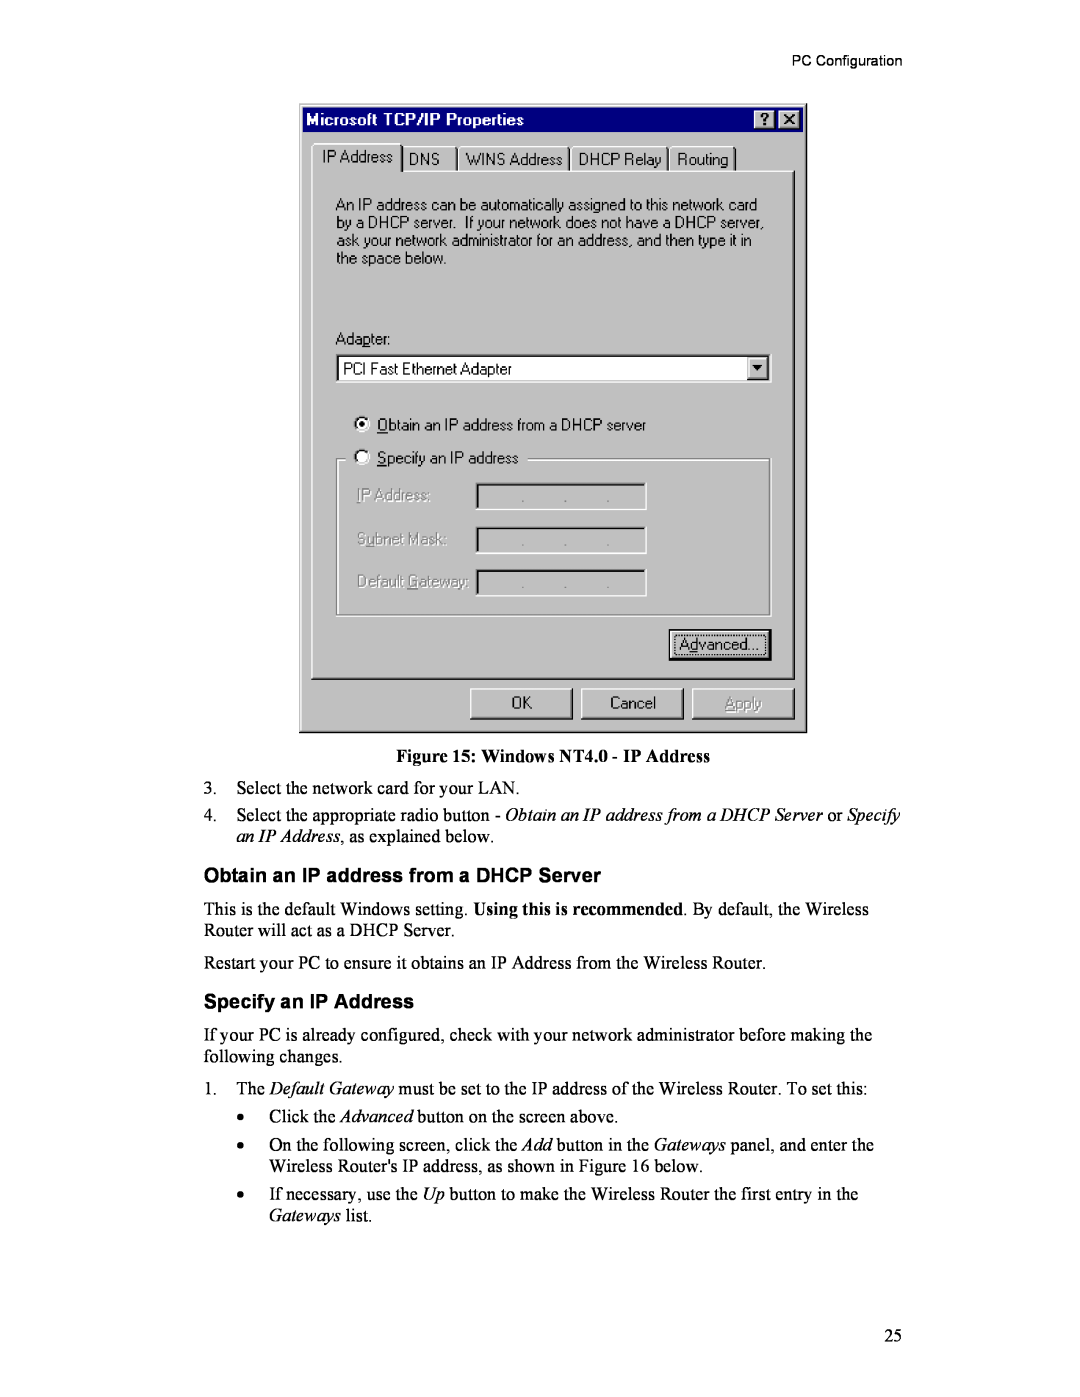 Hawking Technology HWR54G manual Obtain an IP address from a DHCP Server, Specify an IP Address, Windows NT4.0 - IP Address 